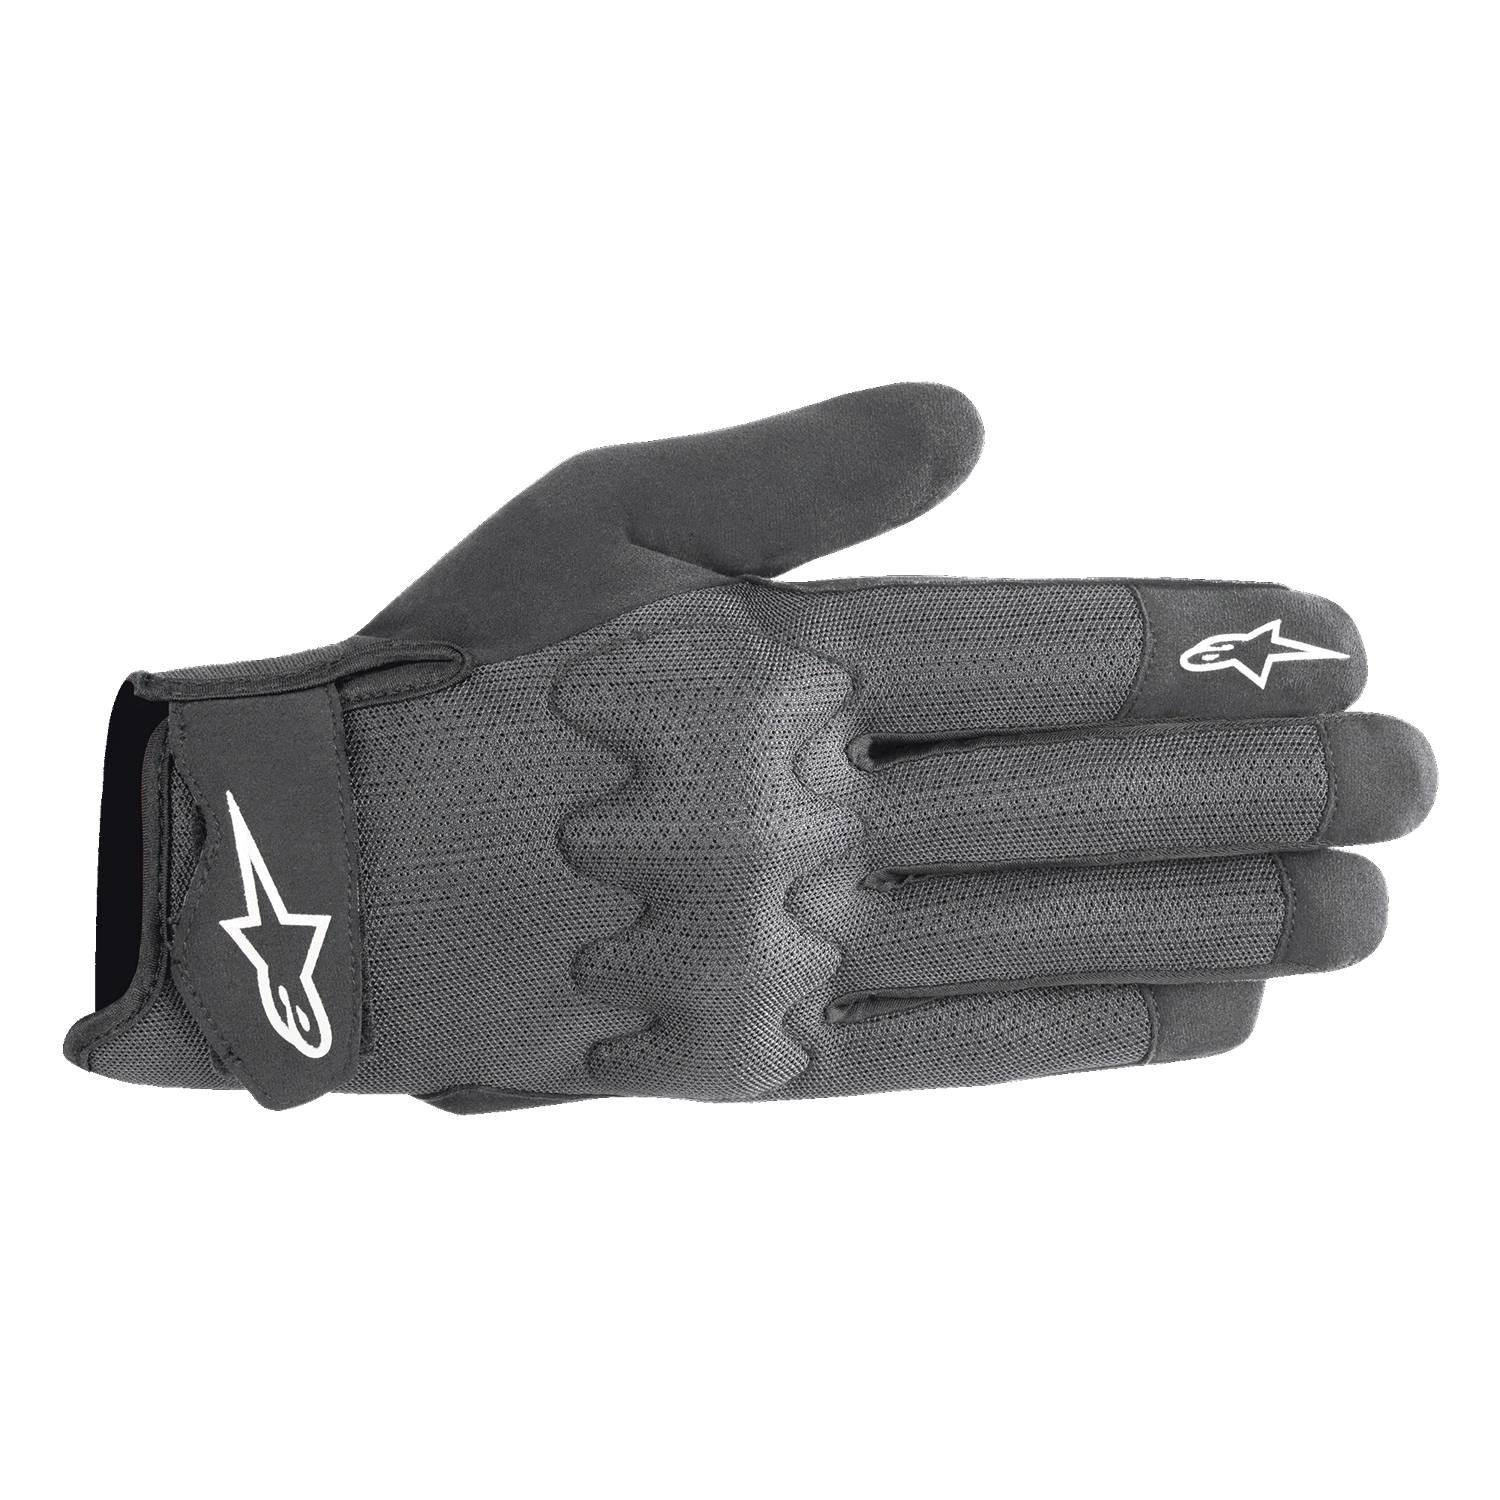 Image of Alpinestars Stated Air Gloves Black Silver Size 2XL ID 8059347168678